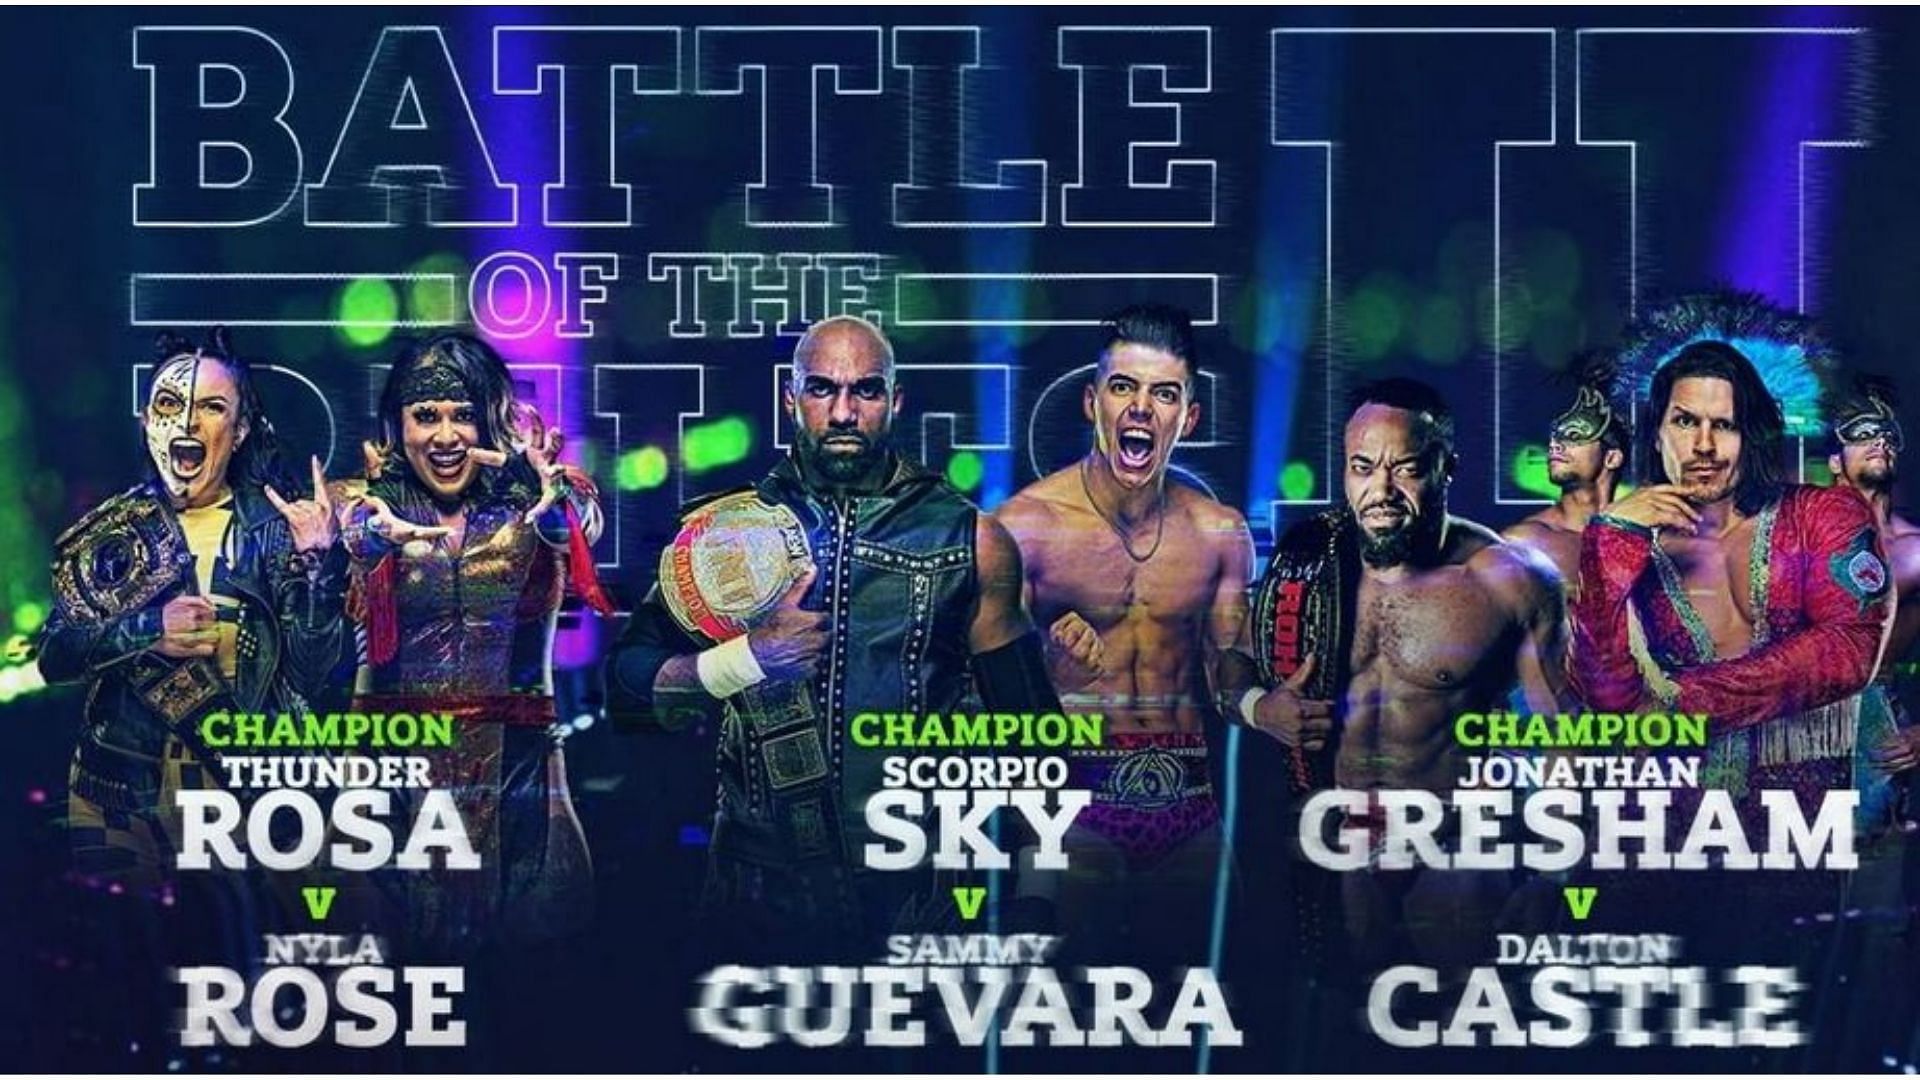 AEW Battle of the Belts II promises a night of title matches